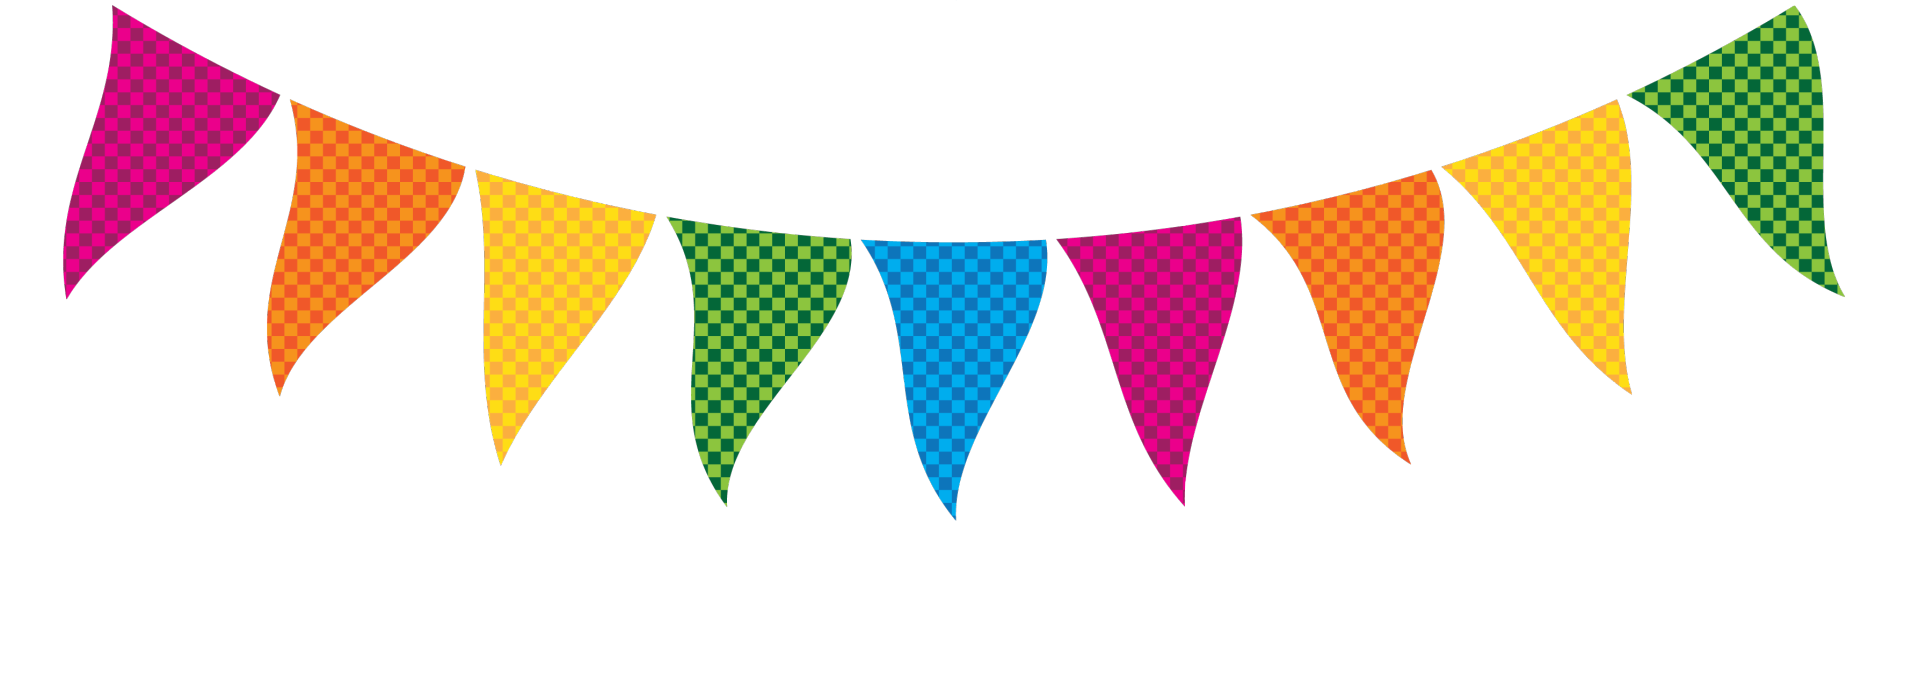 Birthday Flag Png - ClipArt Best